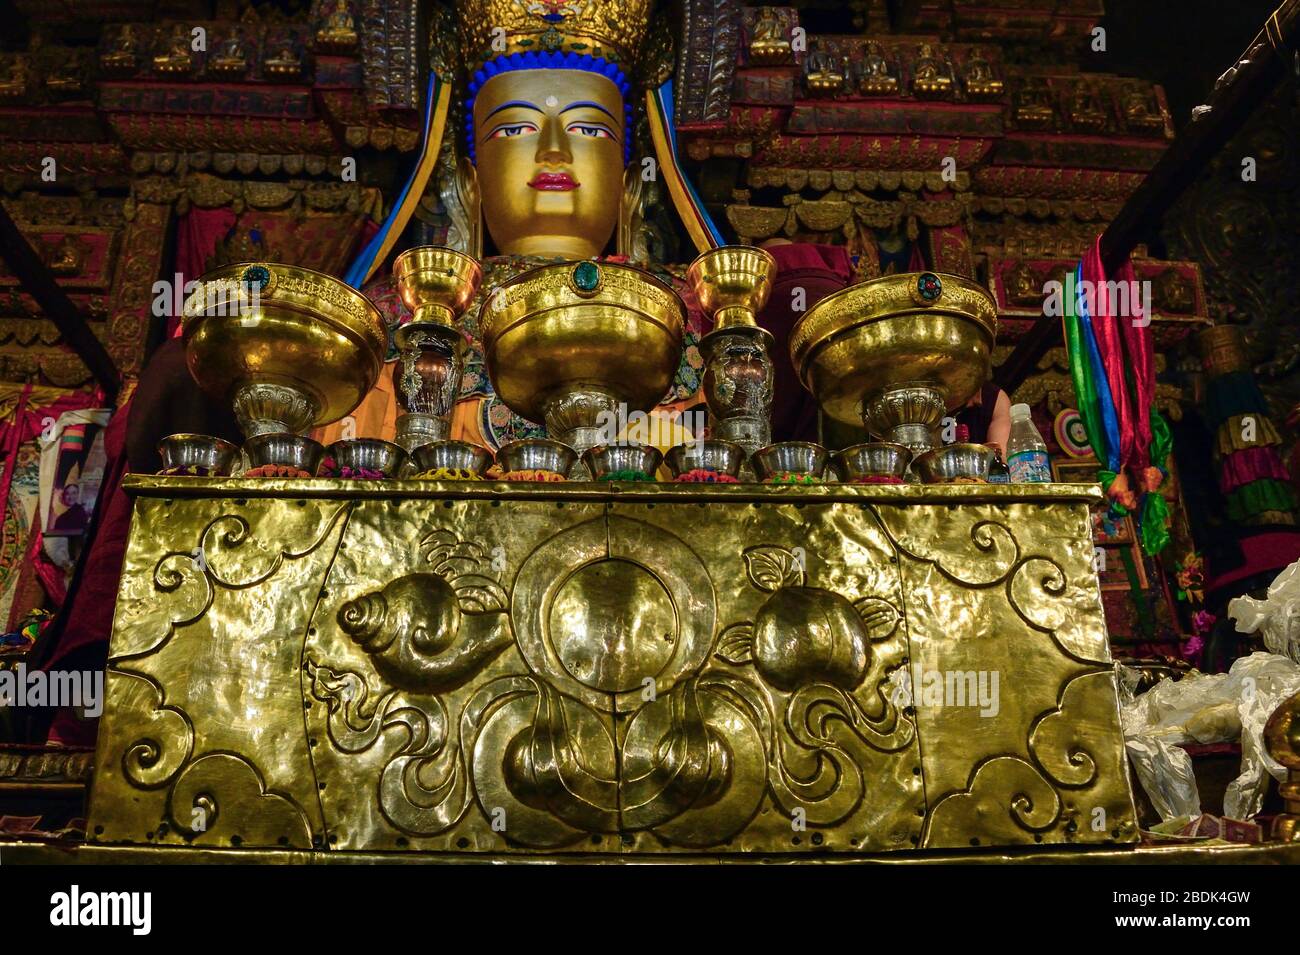 An alter before a golden Buddha is carefully adorned with ornate bowls and chalices for offerings at Pelkor Chode Monastery in Gyantsein the autonomou Stock Photo